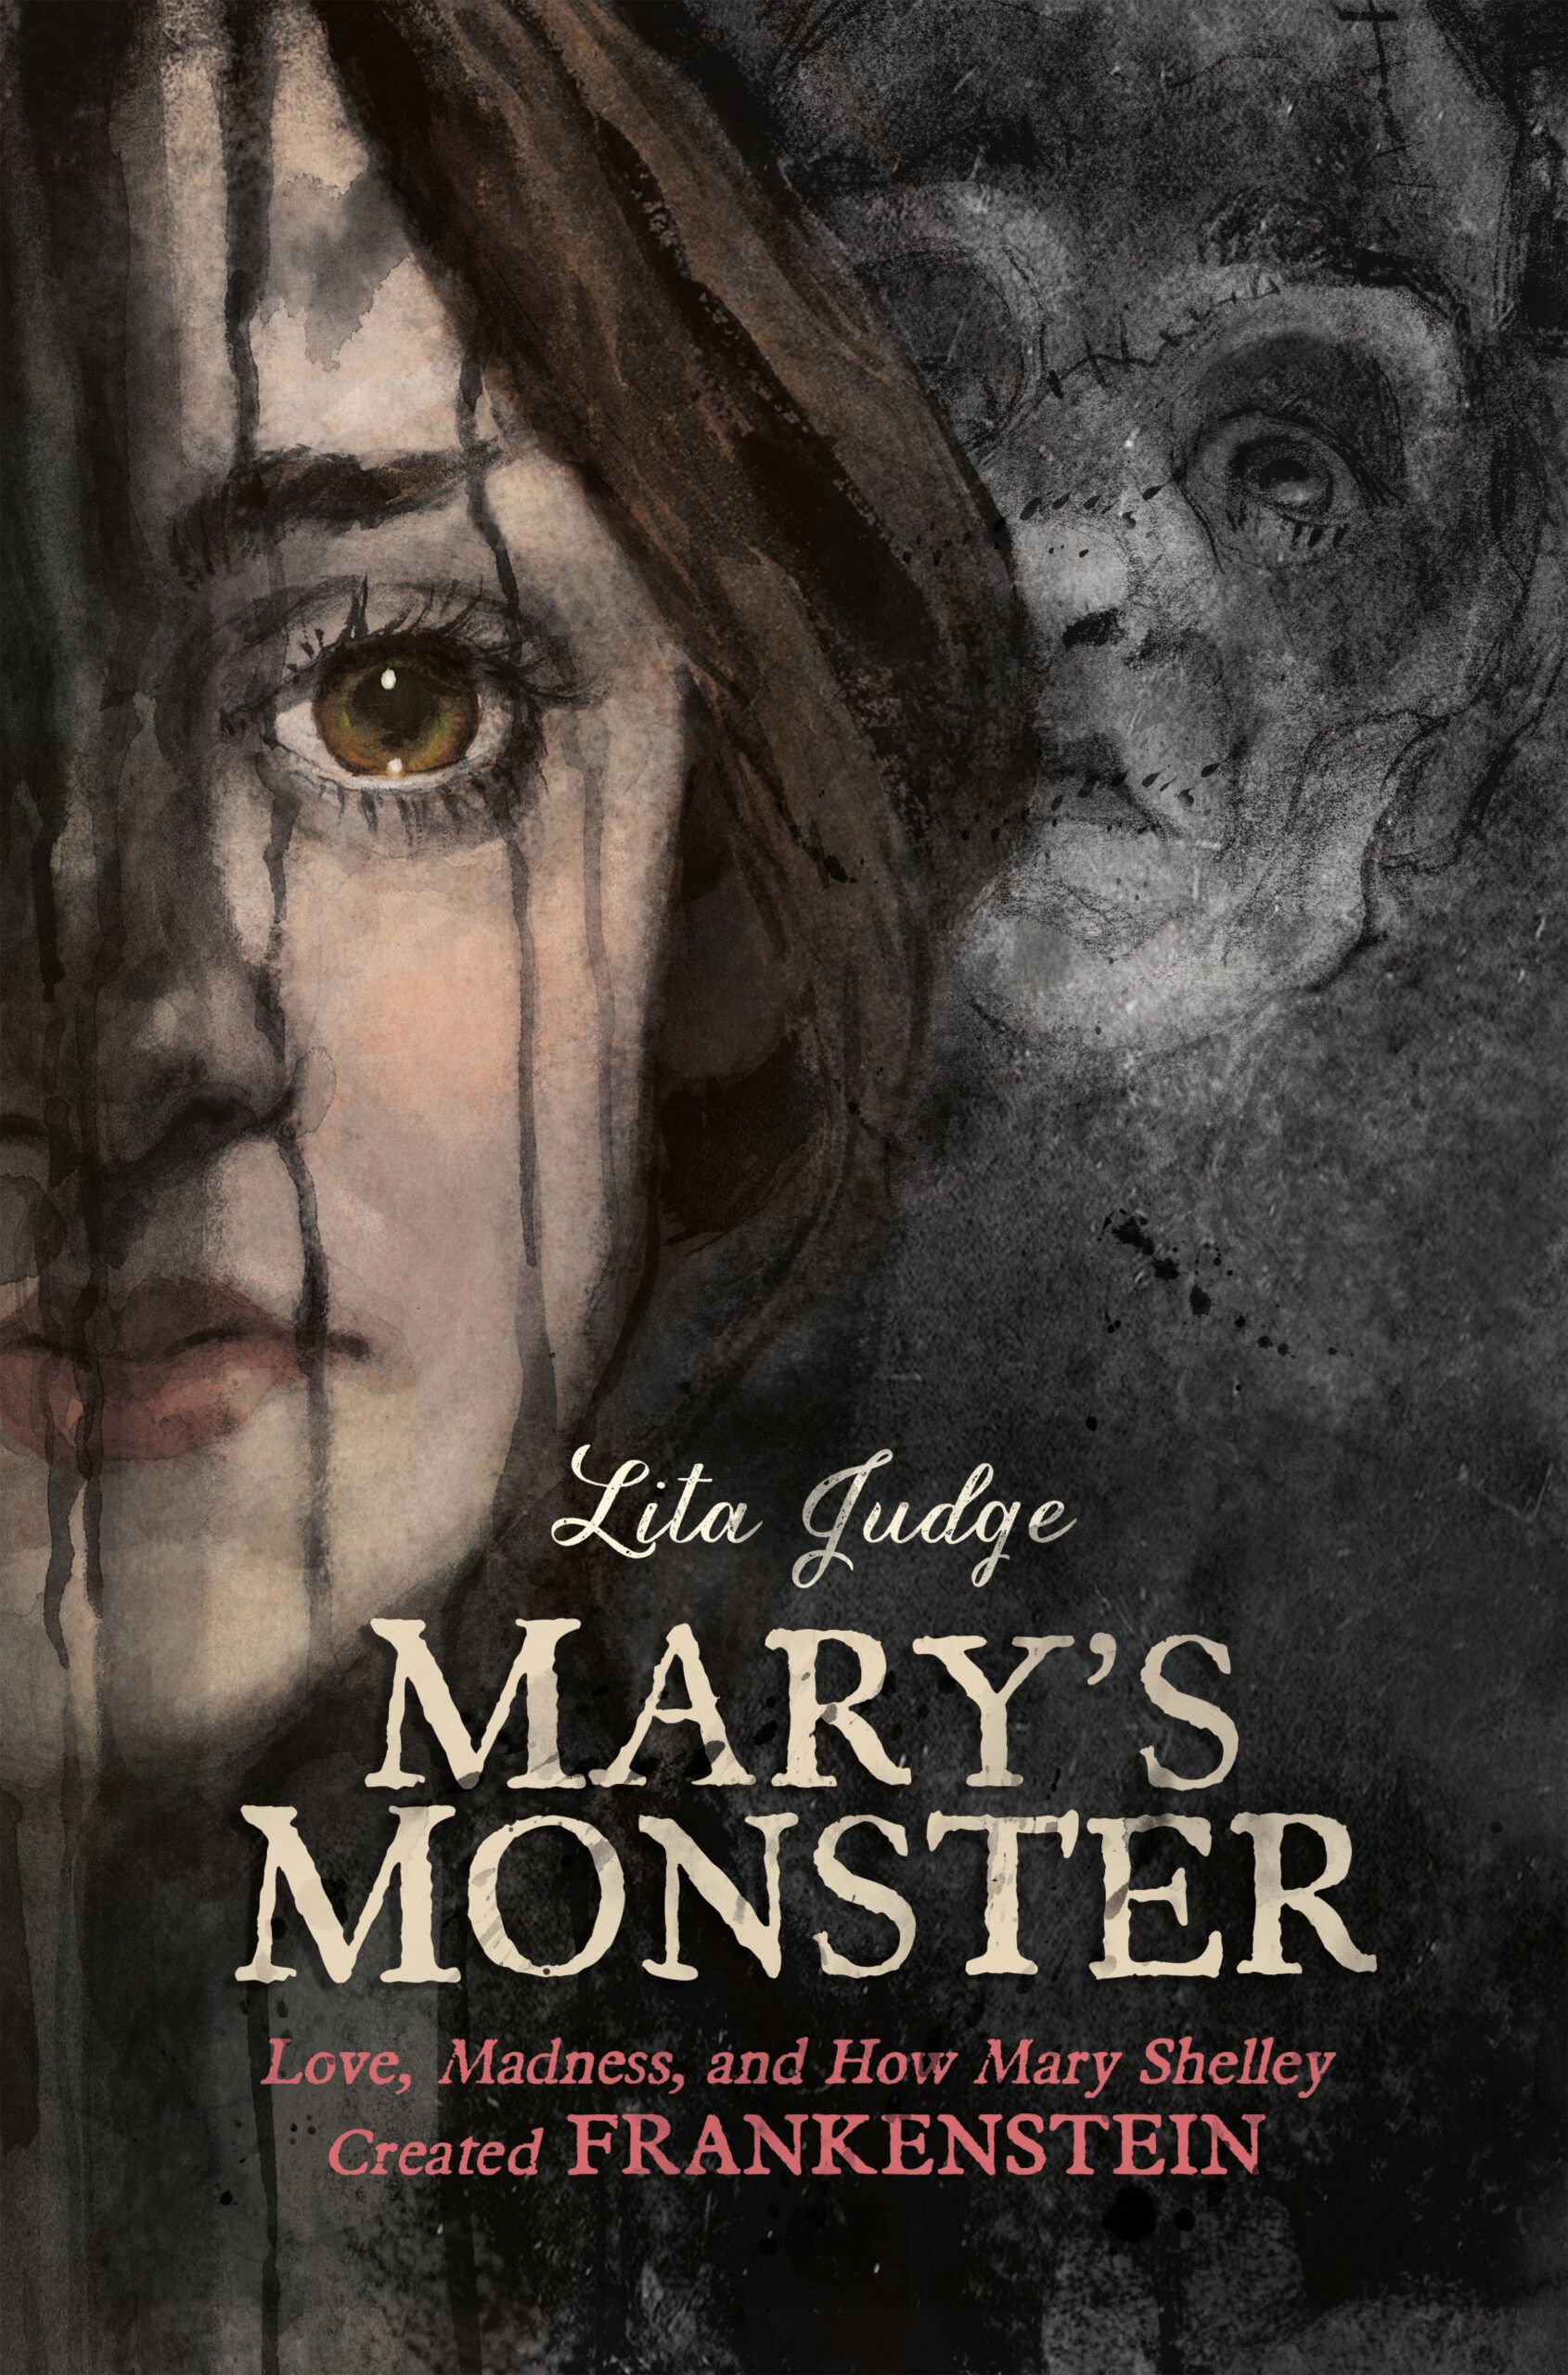 mary's monster book cover